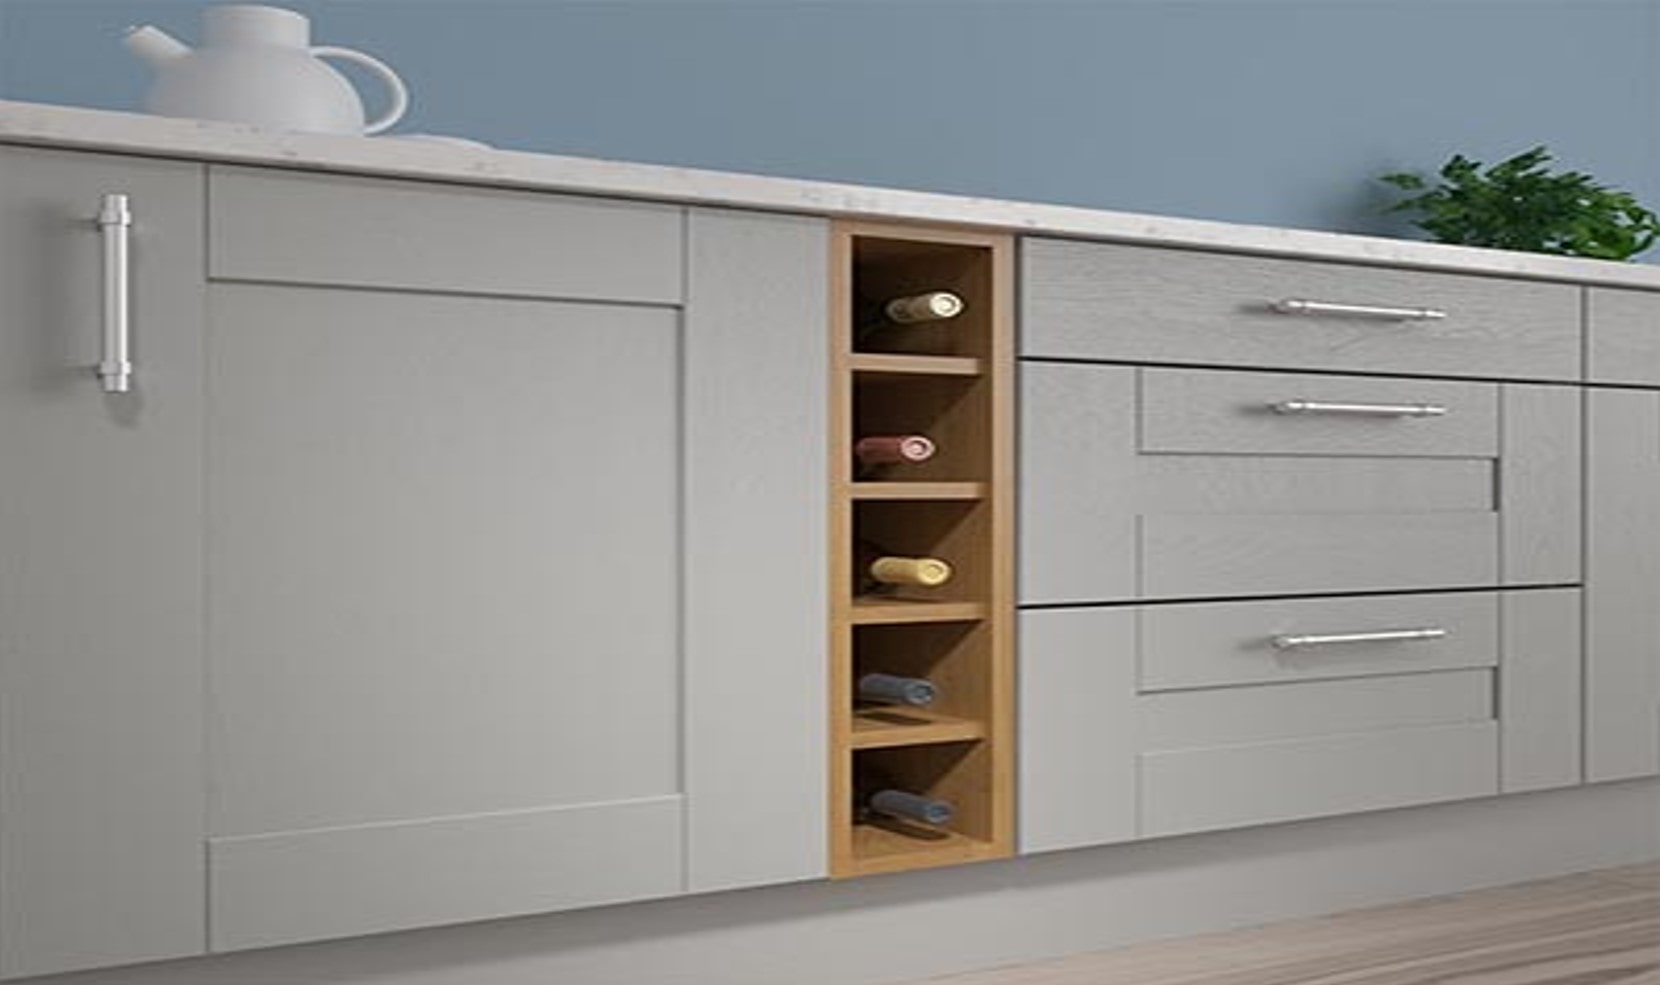 Close up of modern kitchen cupboards with wood grain wine rack built-in.